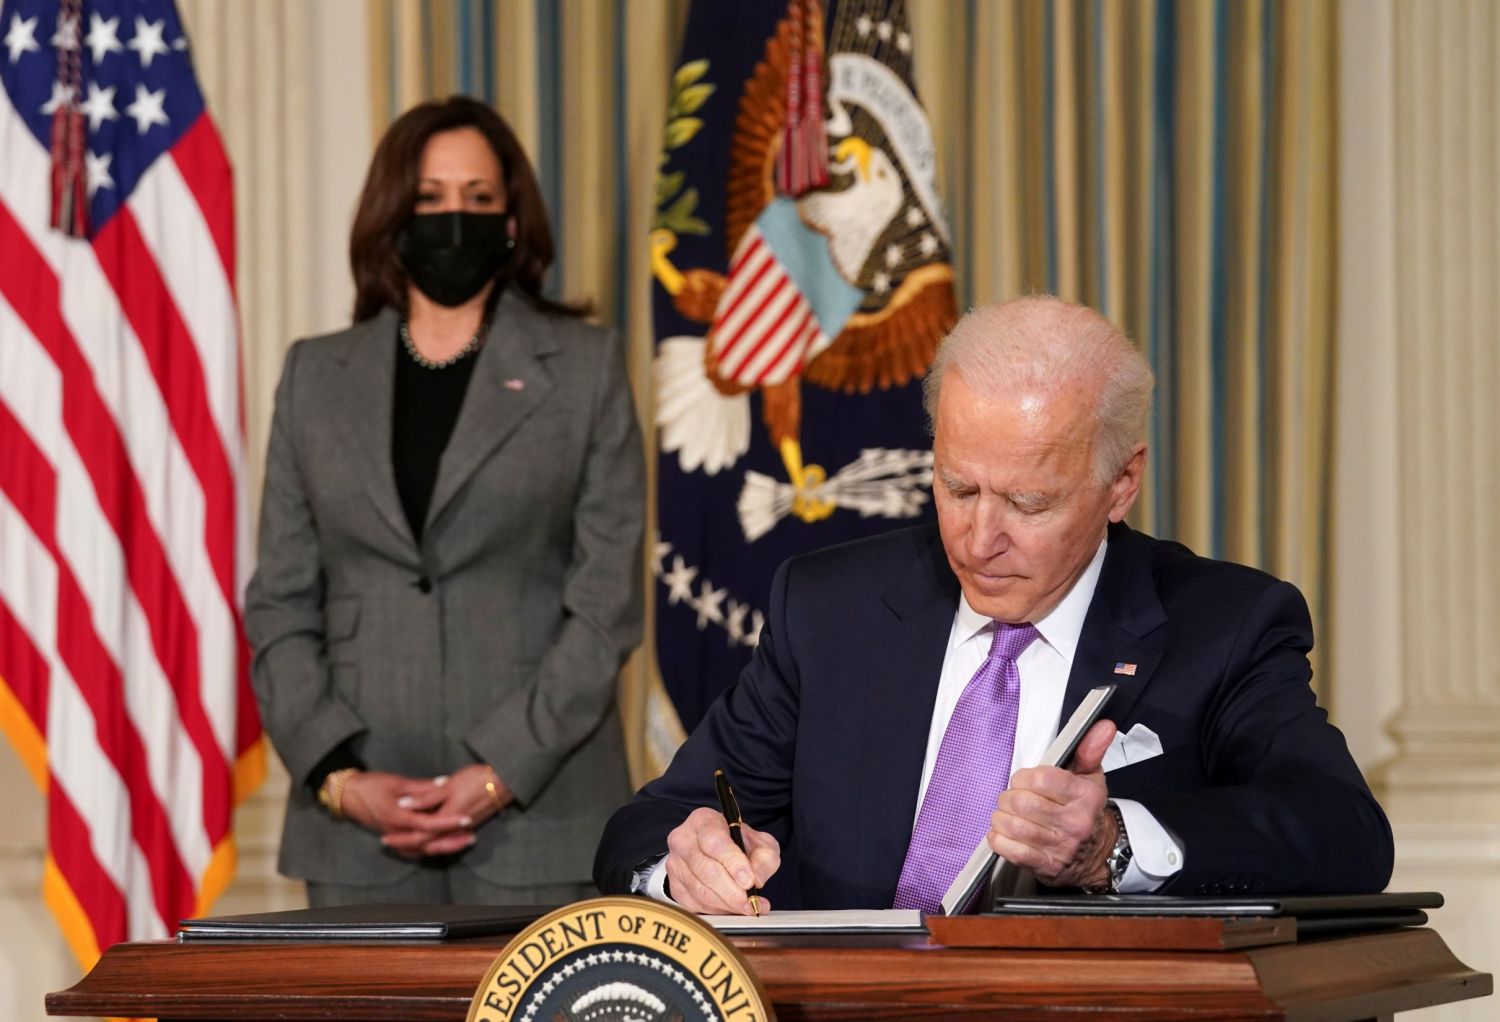 U.S. Vice President Kamala Harris watches as President Joe Biden signs executive orders on his racial equity agenda at the White House in Washington, U.S., January 26, 2021. REUTERS/Kevin Lamarque